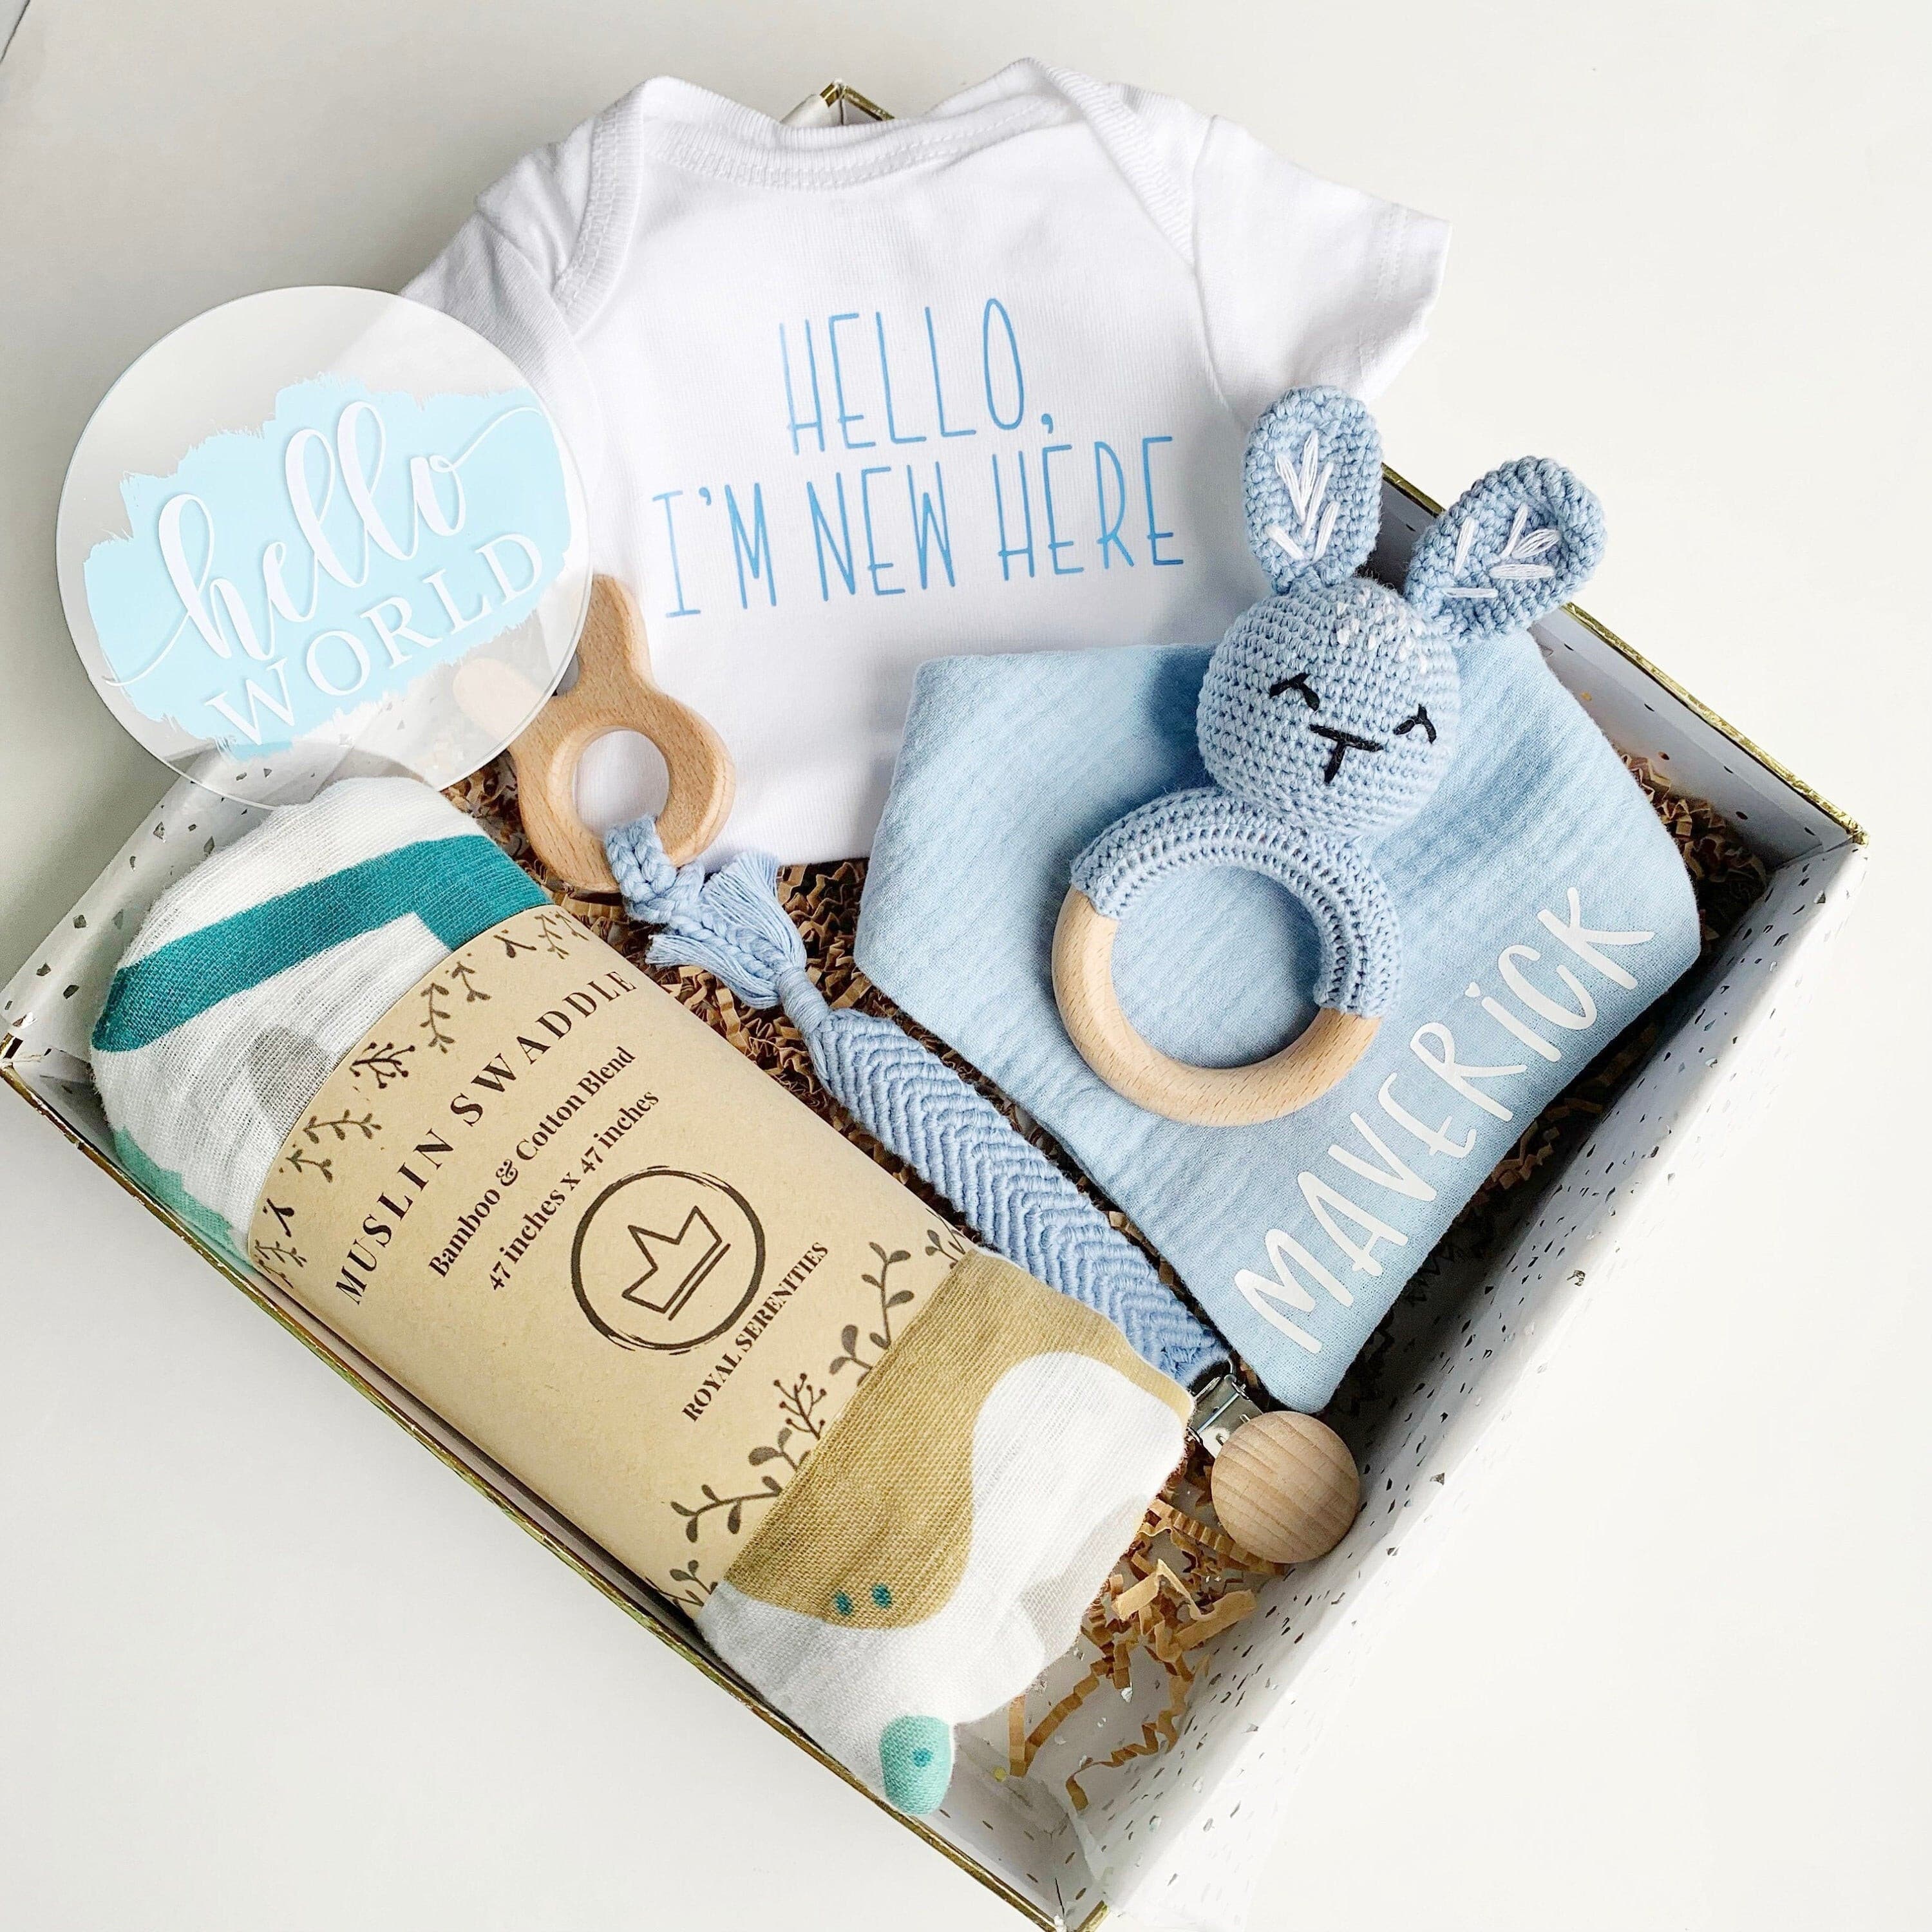 Homemade Baby Gifts: Over 15 Adorable DIY Baby Gift Ideas! - Leap of Faith  Crafting